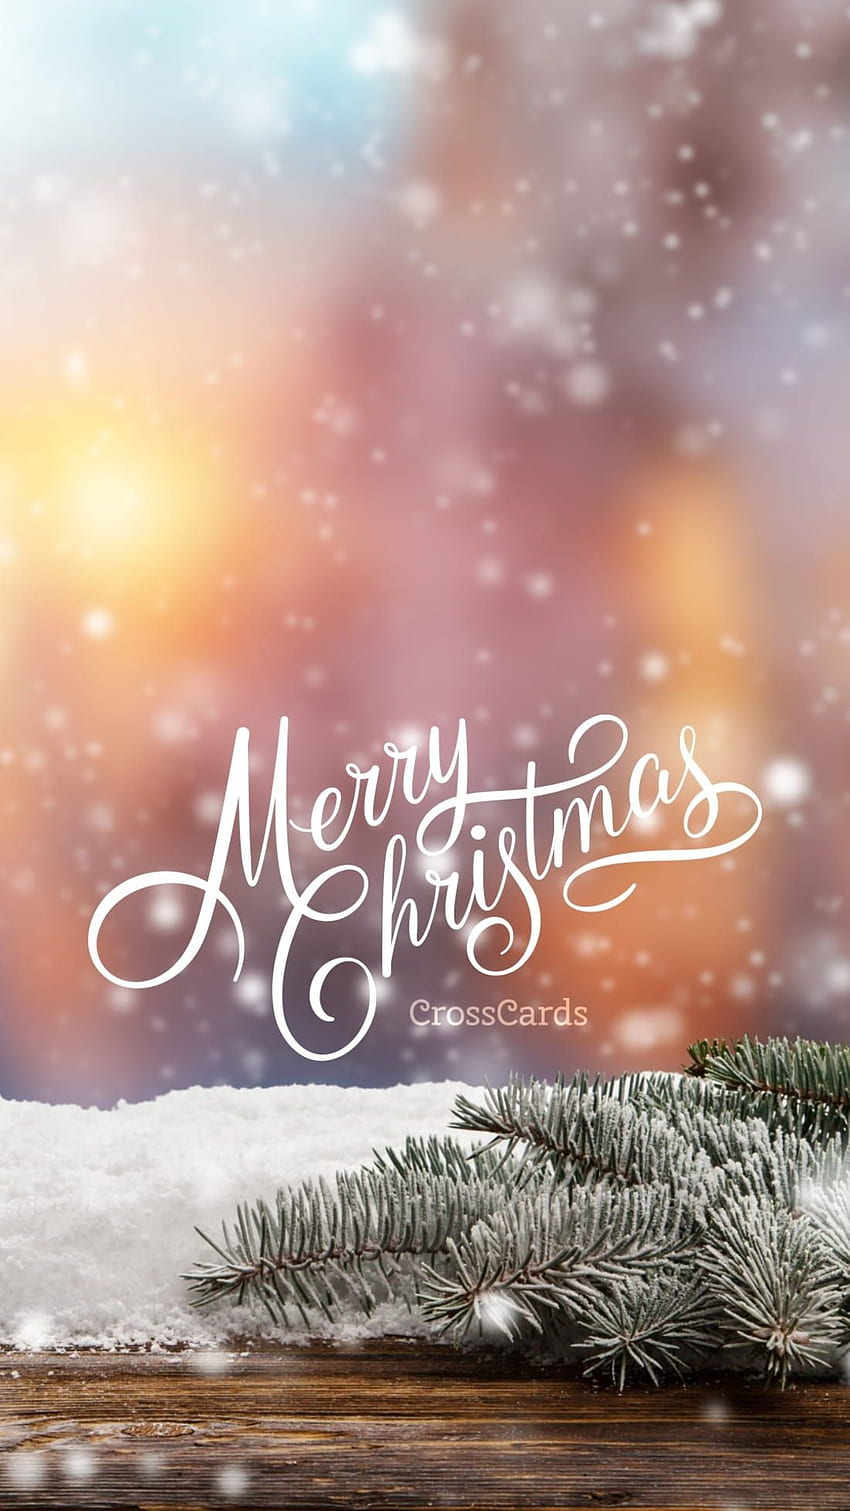 Merry Christmas to You - Phone and Mobile Background HD phone wallpaper